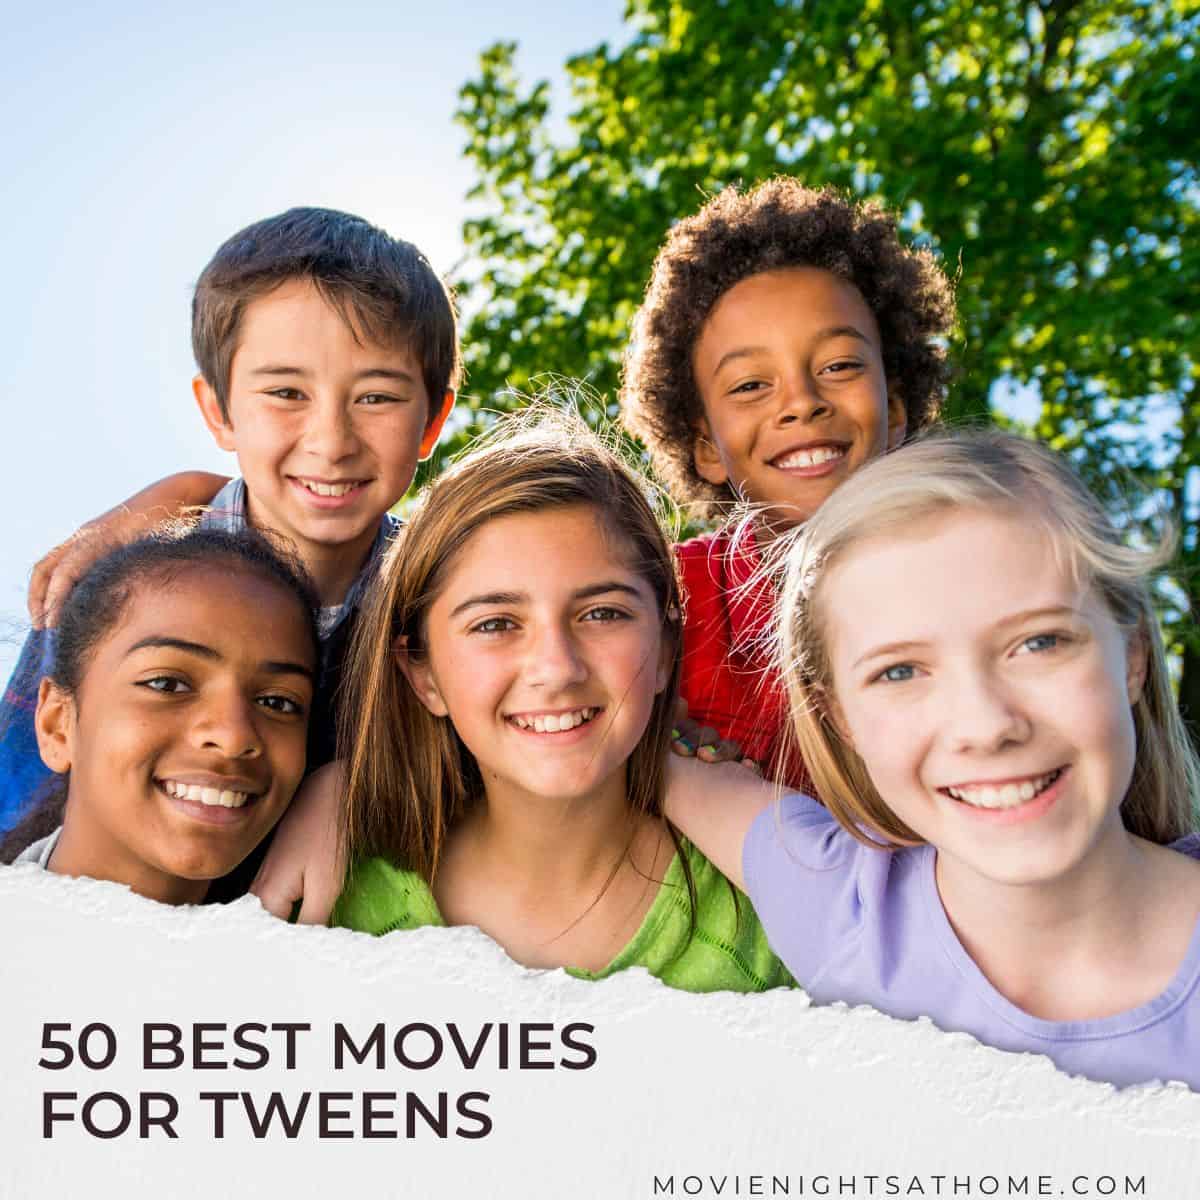 5 kids between 11 and 13 with the text overlay 50 best movies for tweens